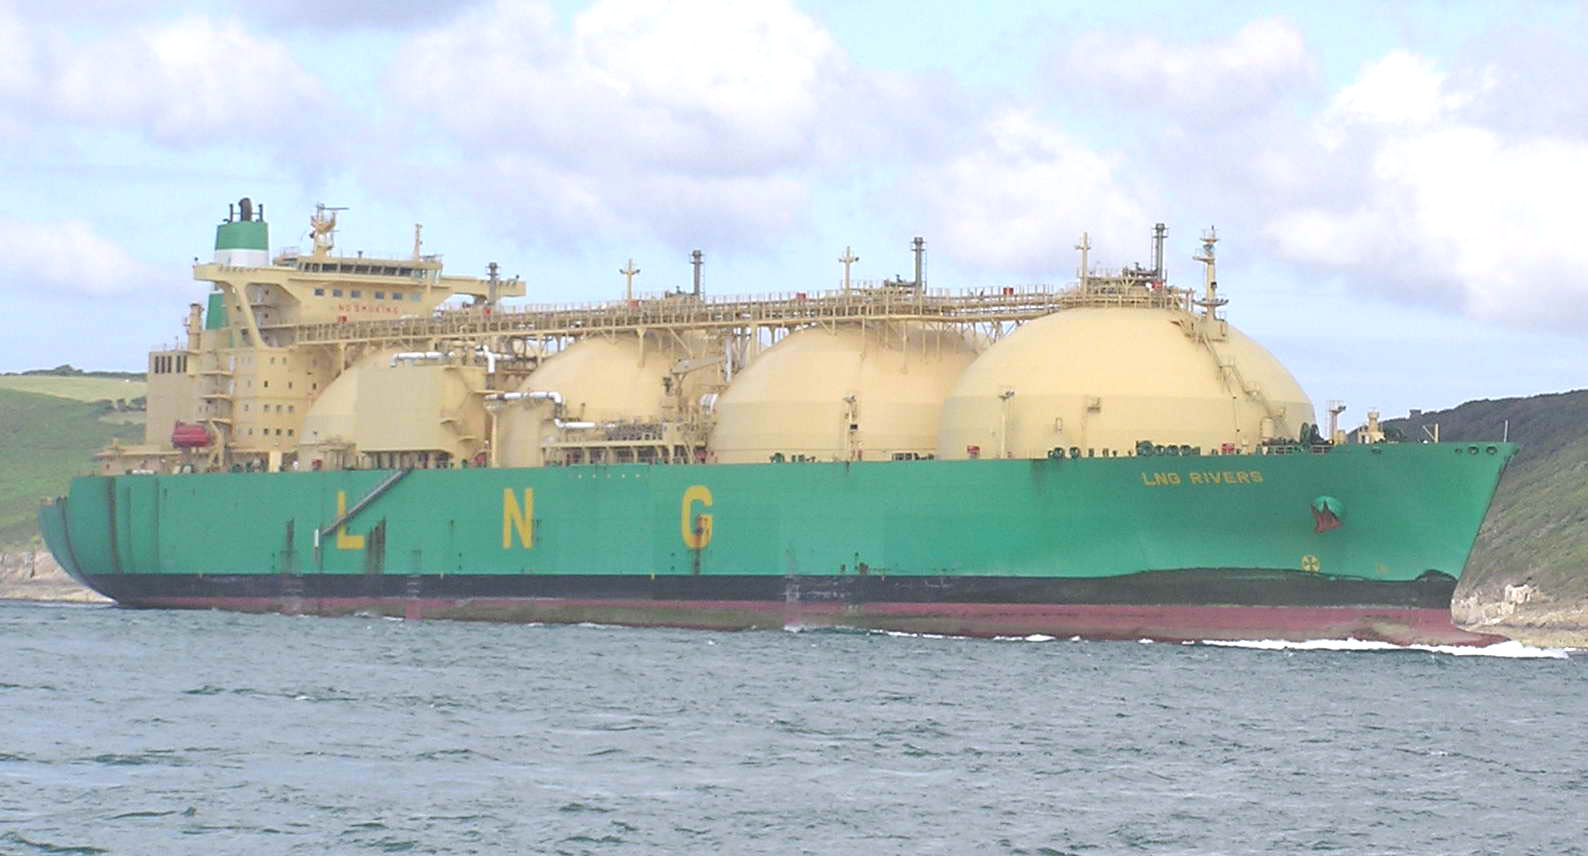 LNG Rivers, with a capacity of 135,000 cubic metres